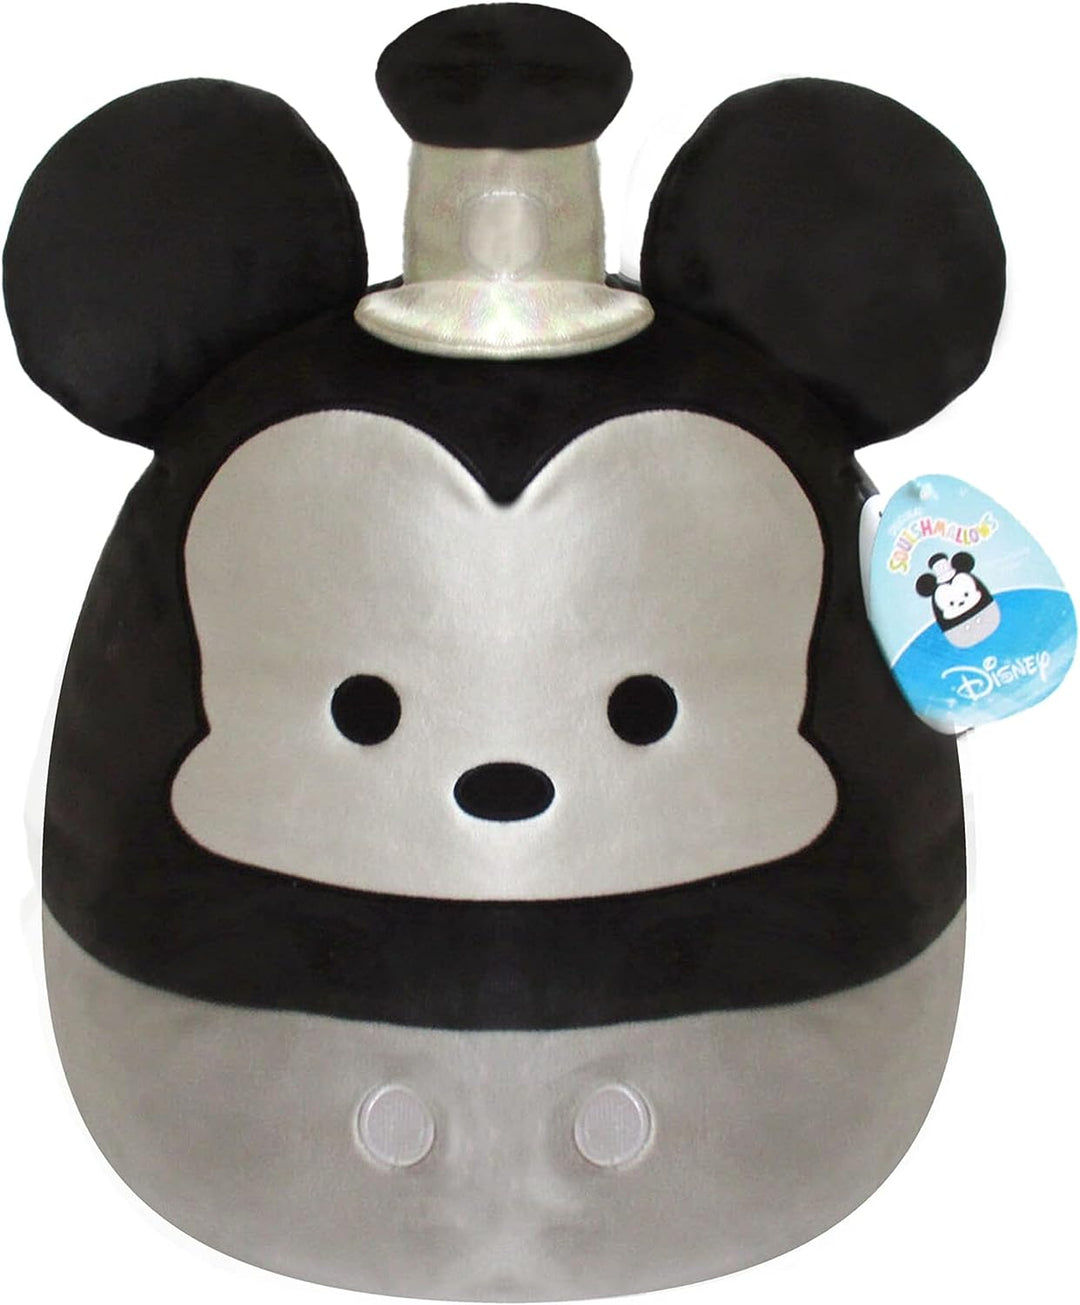 Squishmallows Disney Steamboat Willie Mickey Mouse 14" Plush